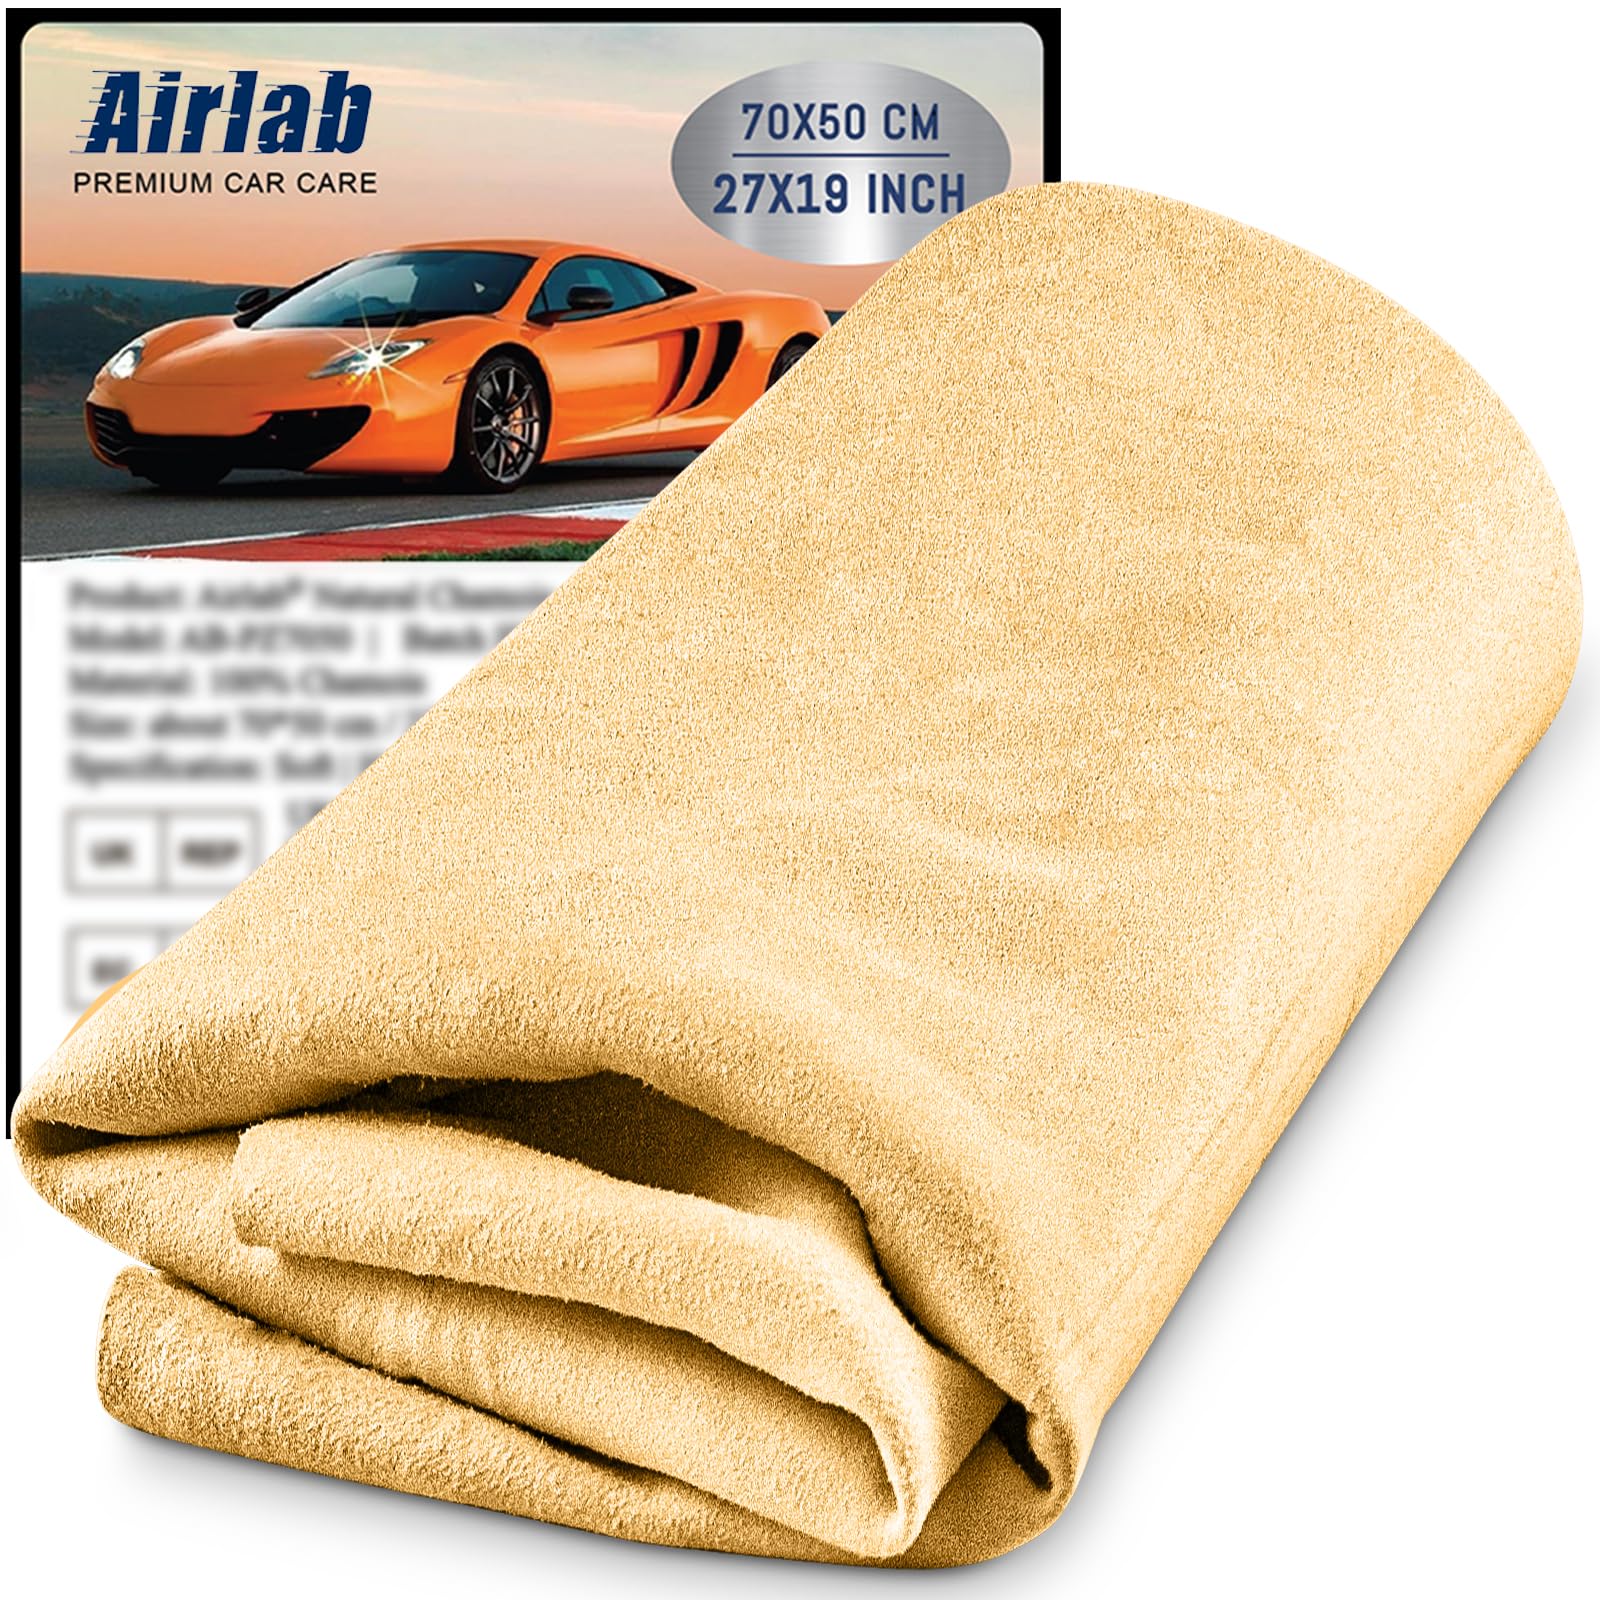 Airlab Chamois Cloth for Car 20'' x 27.6'' (3.7 sq ft) Shammy Towel Car Wash Drying Towel Absorbent Real Leather Lint Free Streak Free 